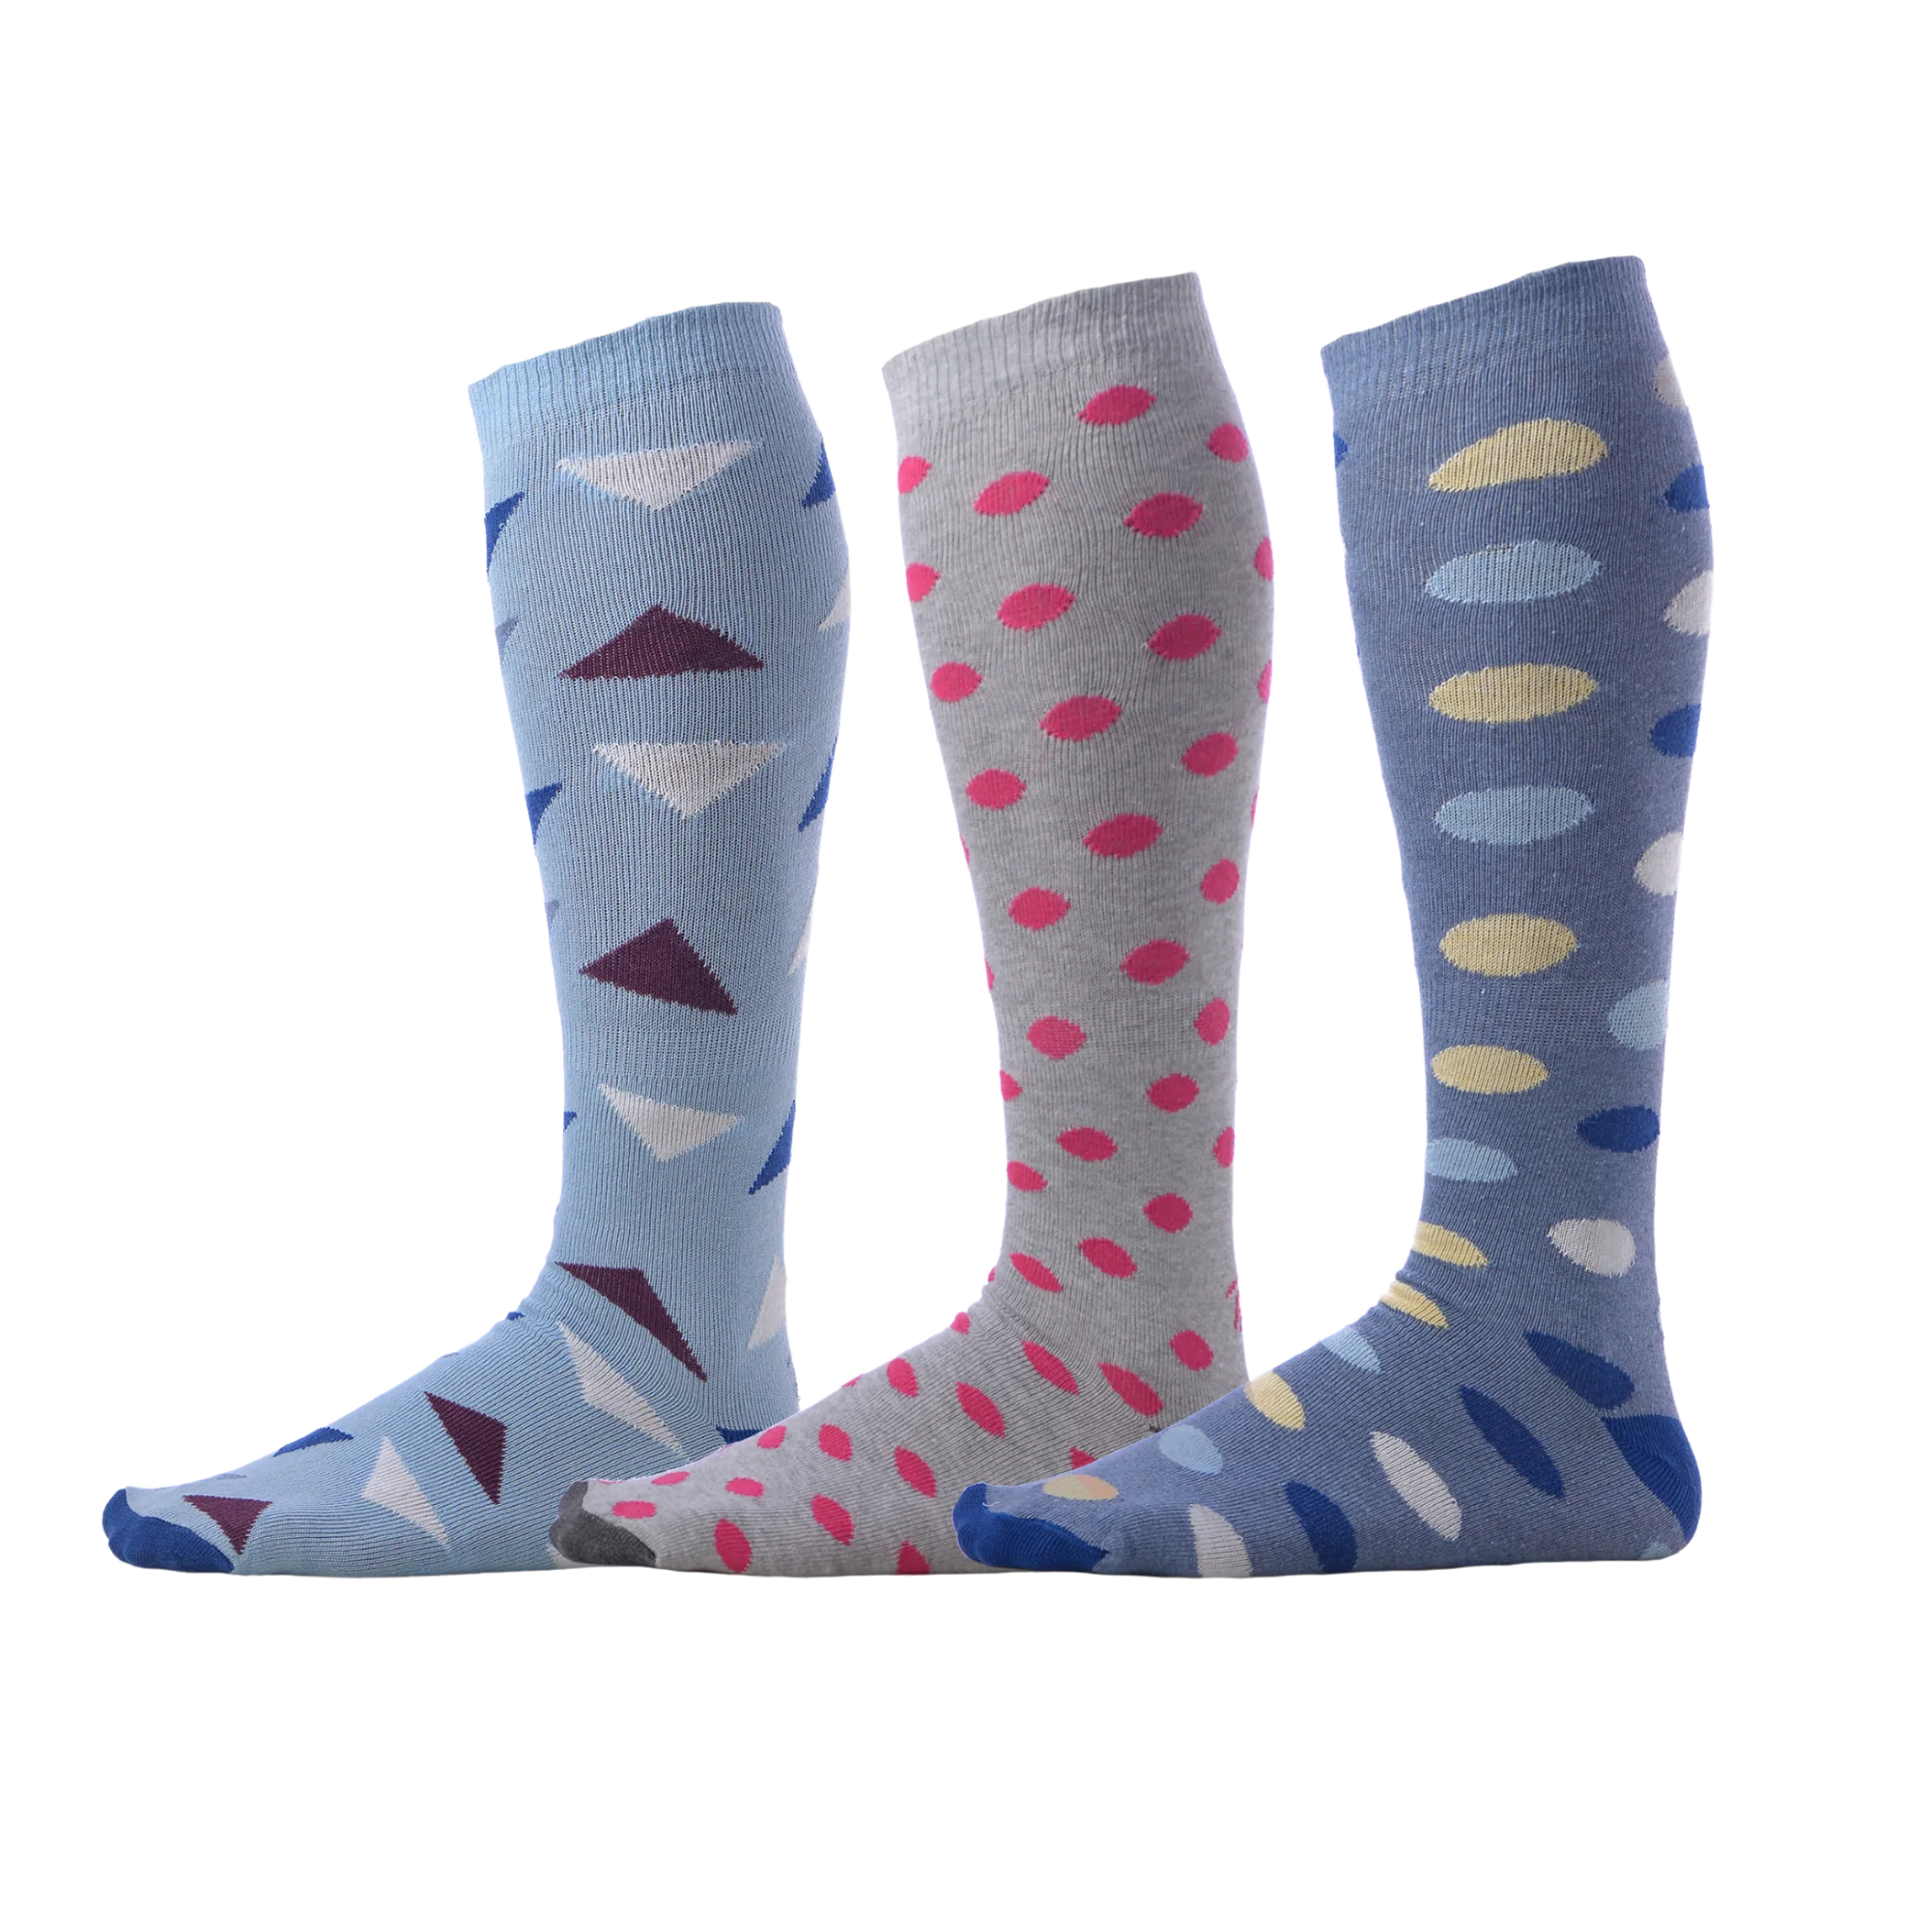 light blue dress socks with colored triangles, light grey dress socks with pink polka dots, blue dress socks with colored ovals